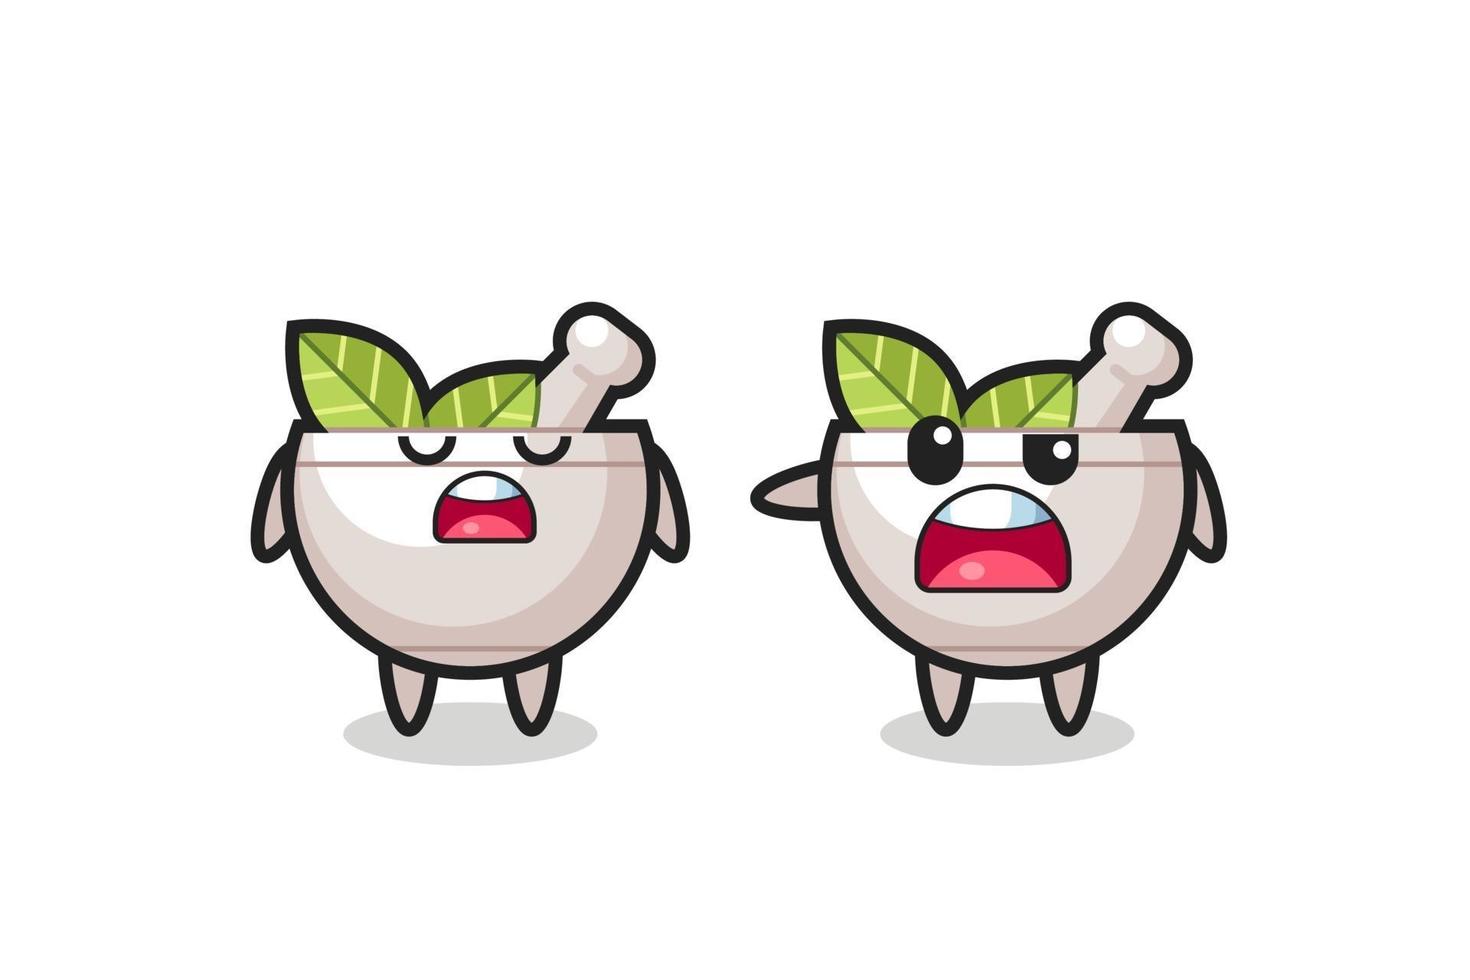 illustration of the argue between two cute herbal bowl characters vector